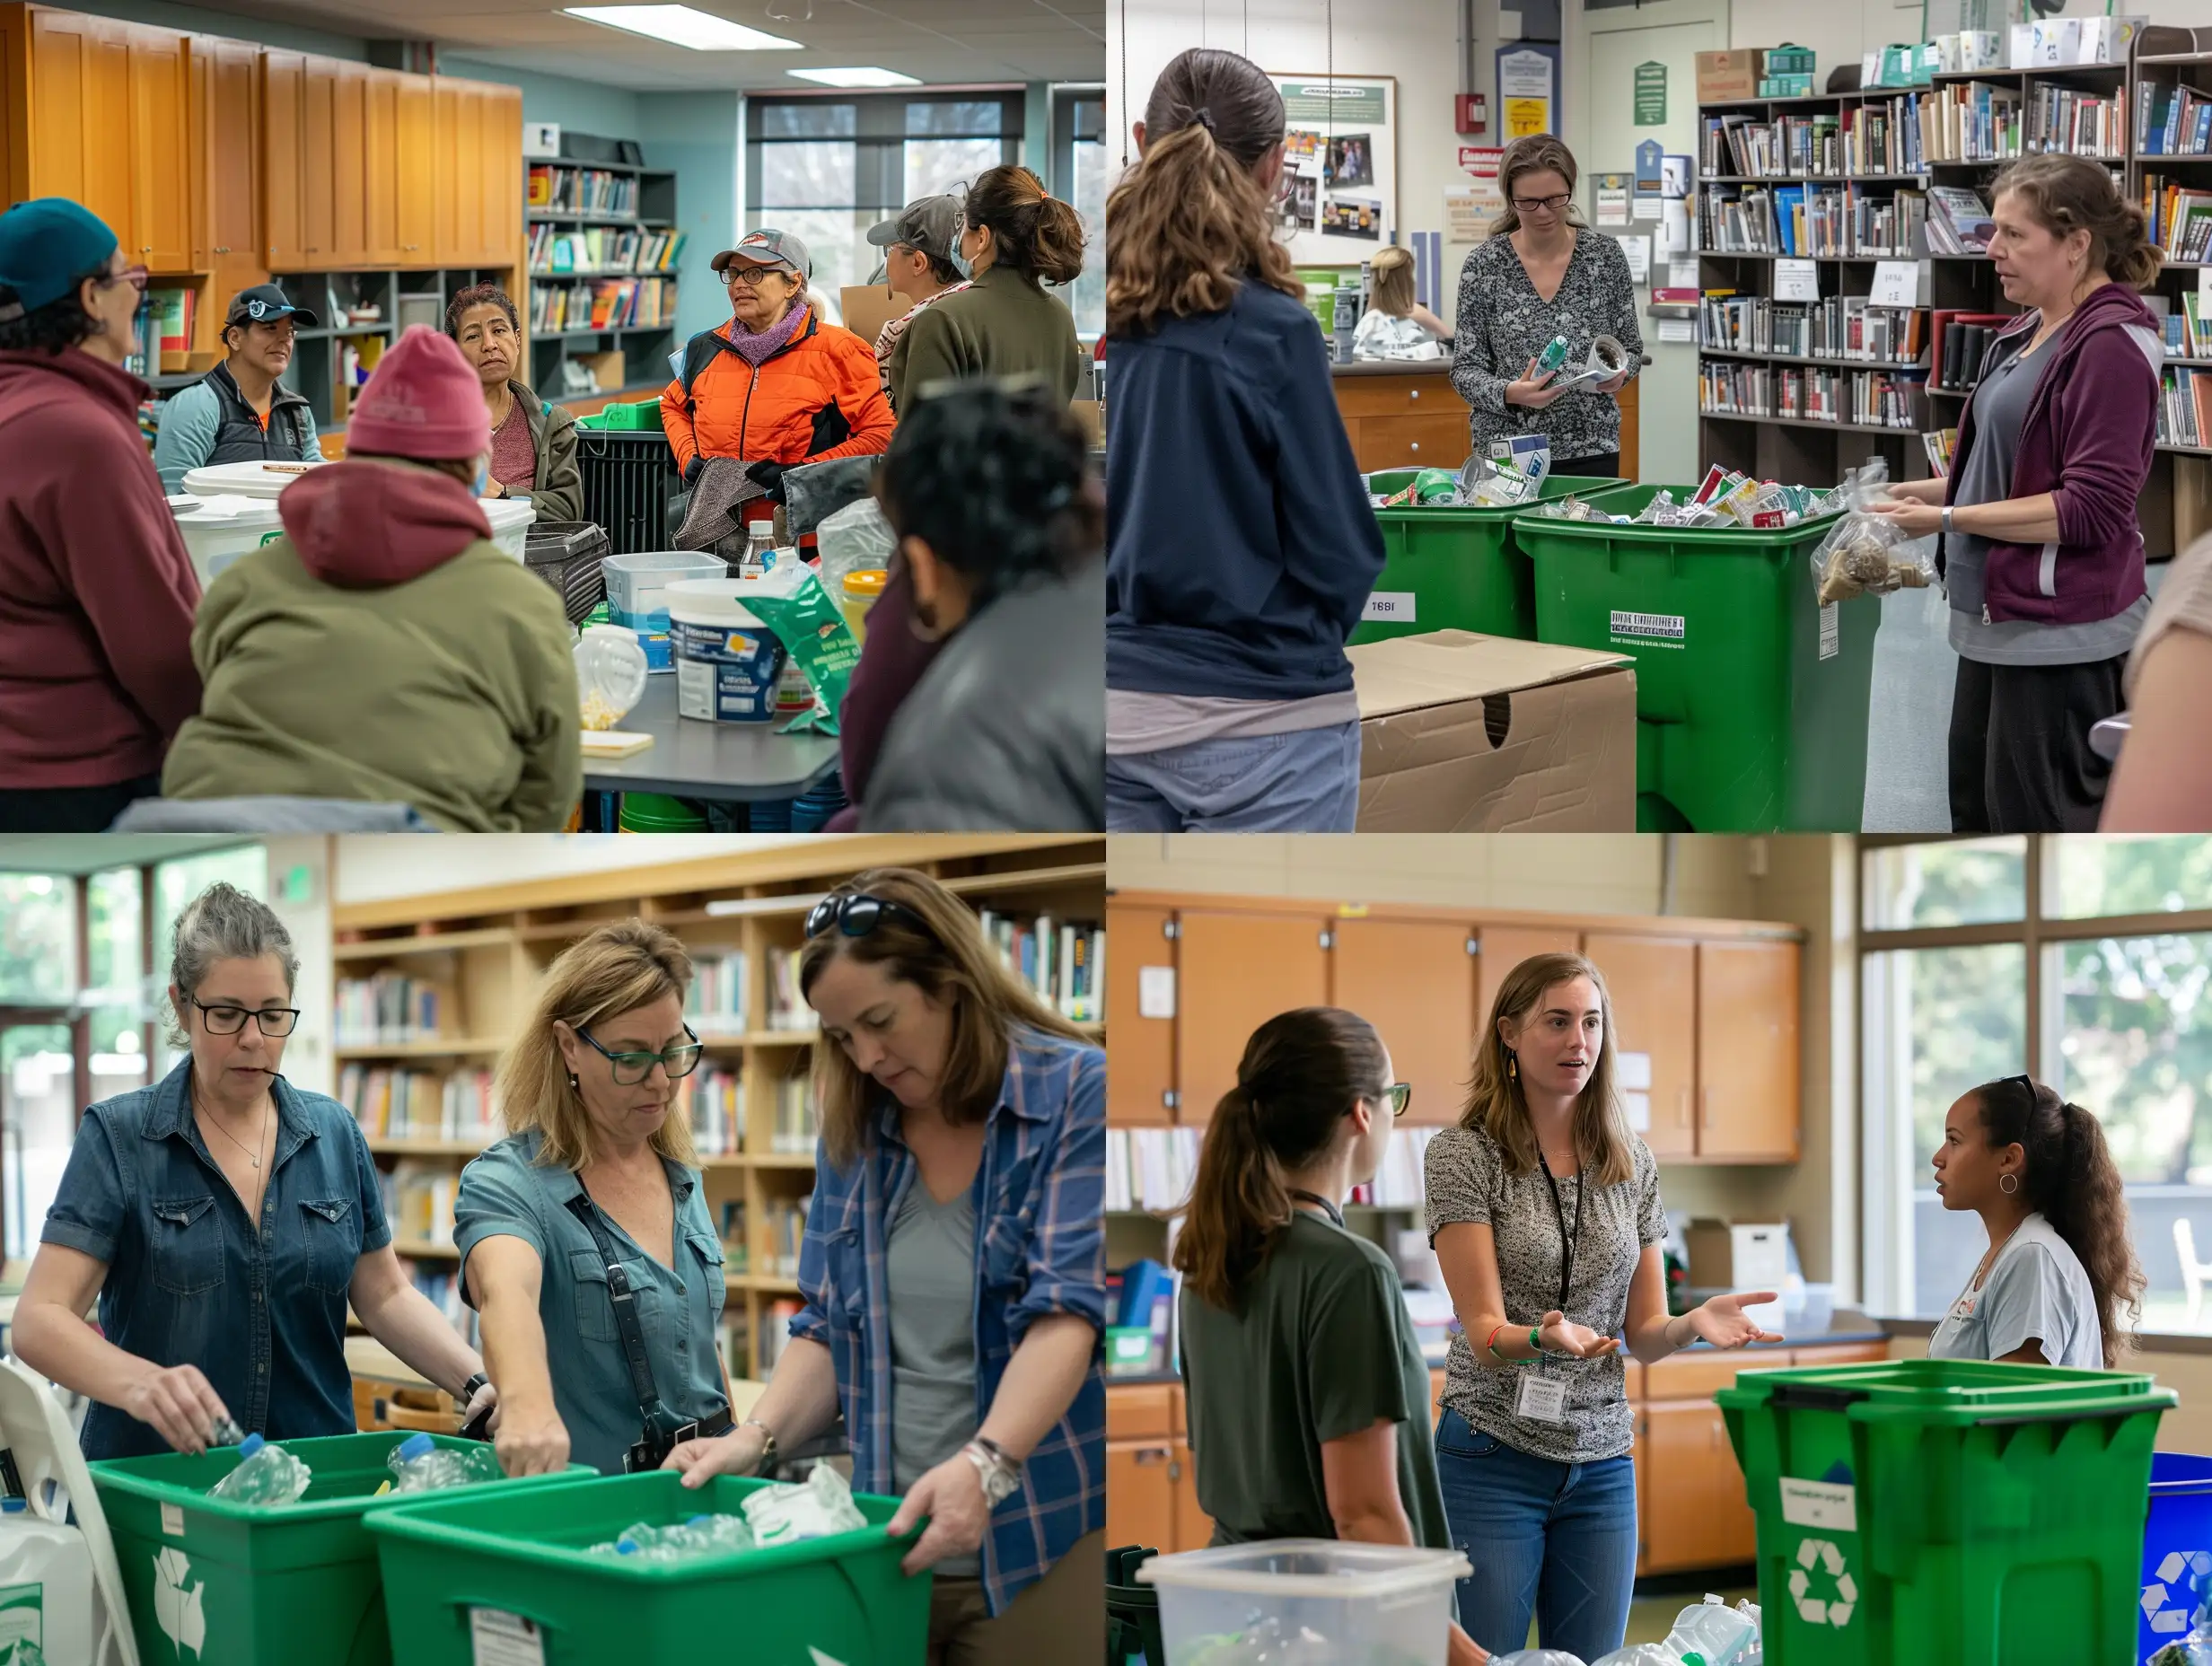 citizens at a workshop about recycling at a public library
